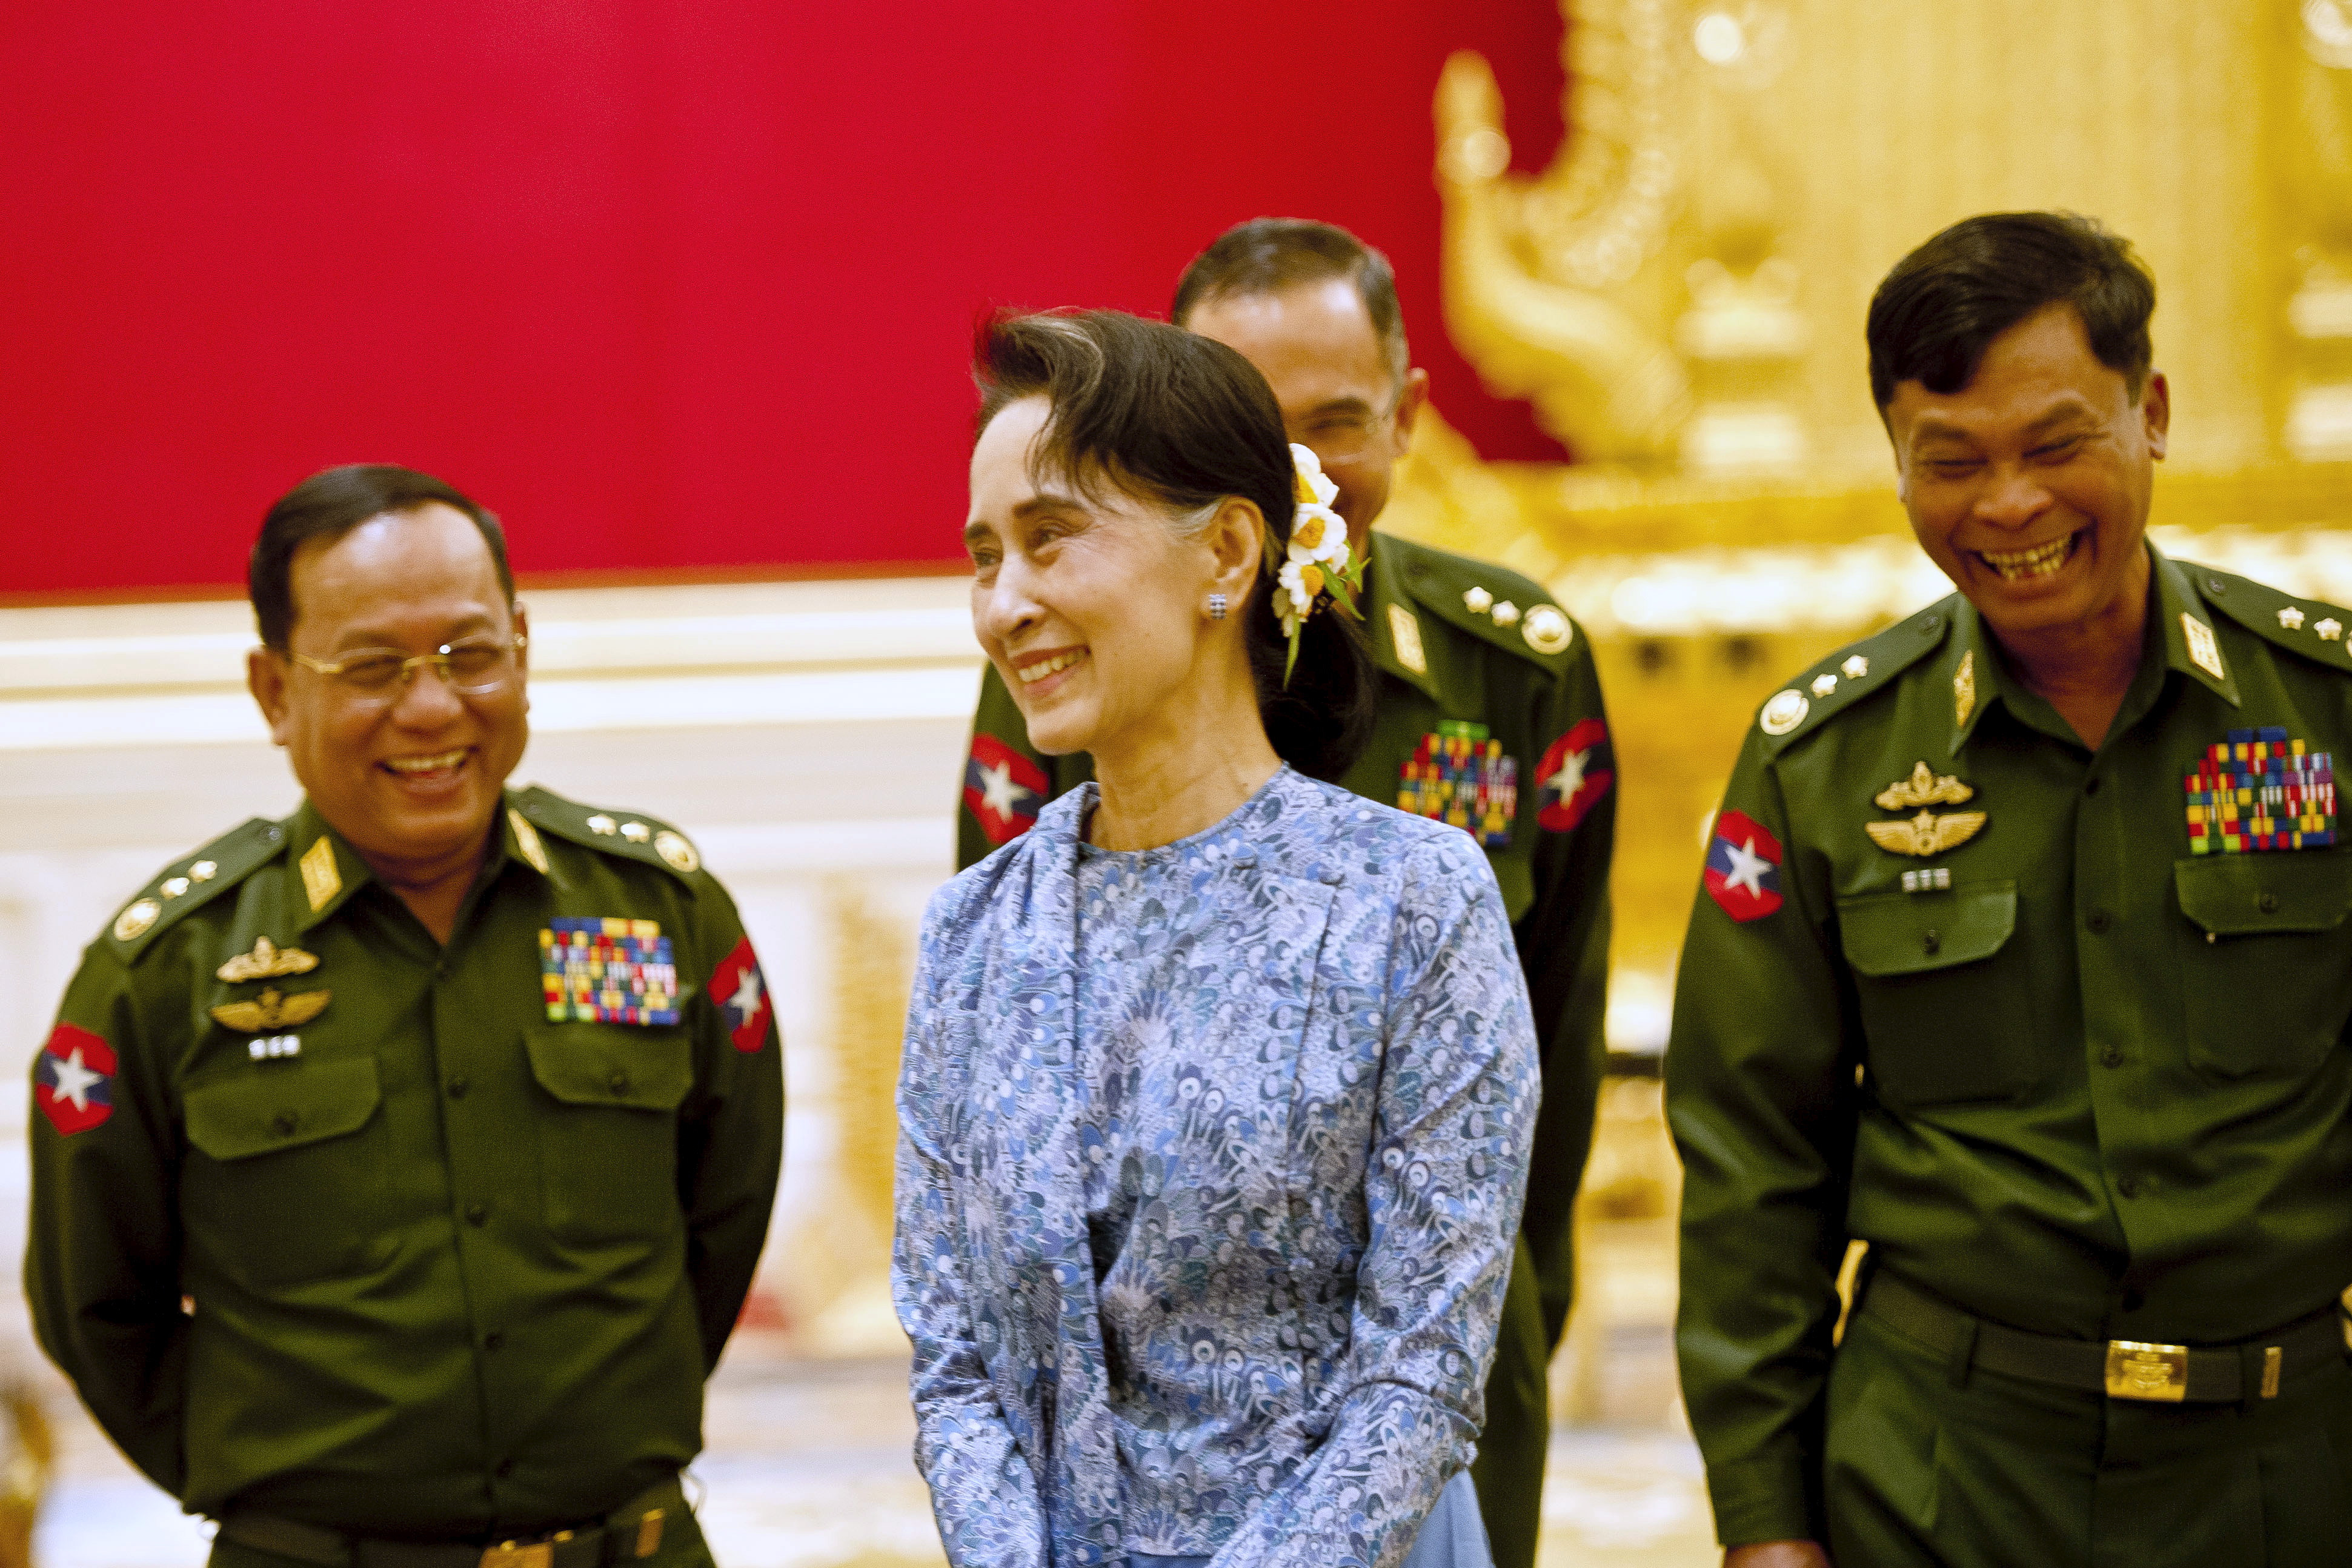 Myanmar's NLD party leader Aung San Suu Kyi smiles with army members during the handover ceremony of outgoing President Thein Sein and new President Htin Kyaw at the presidential palace in Naypyitaw